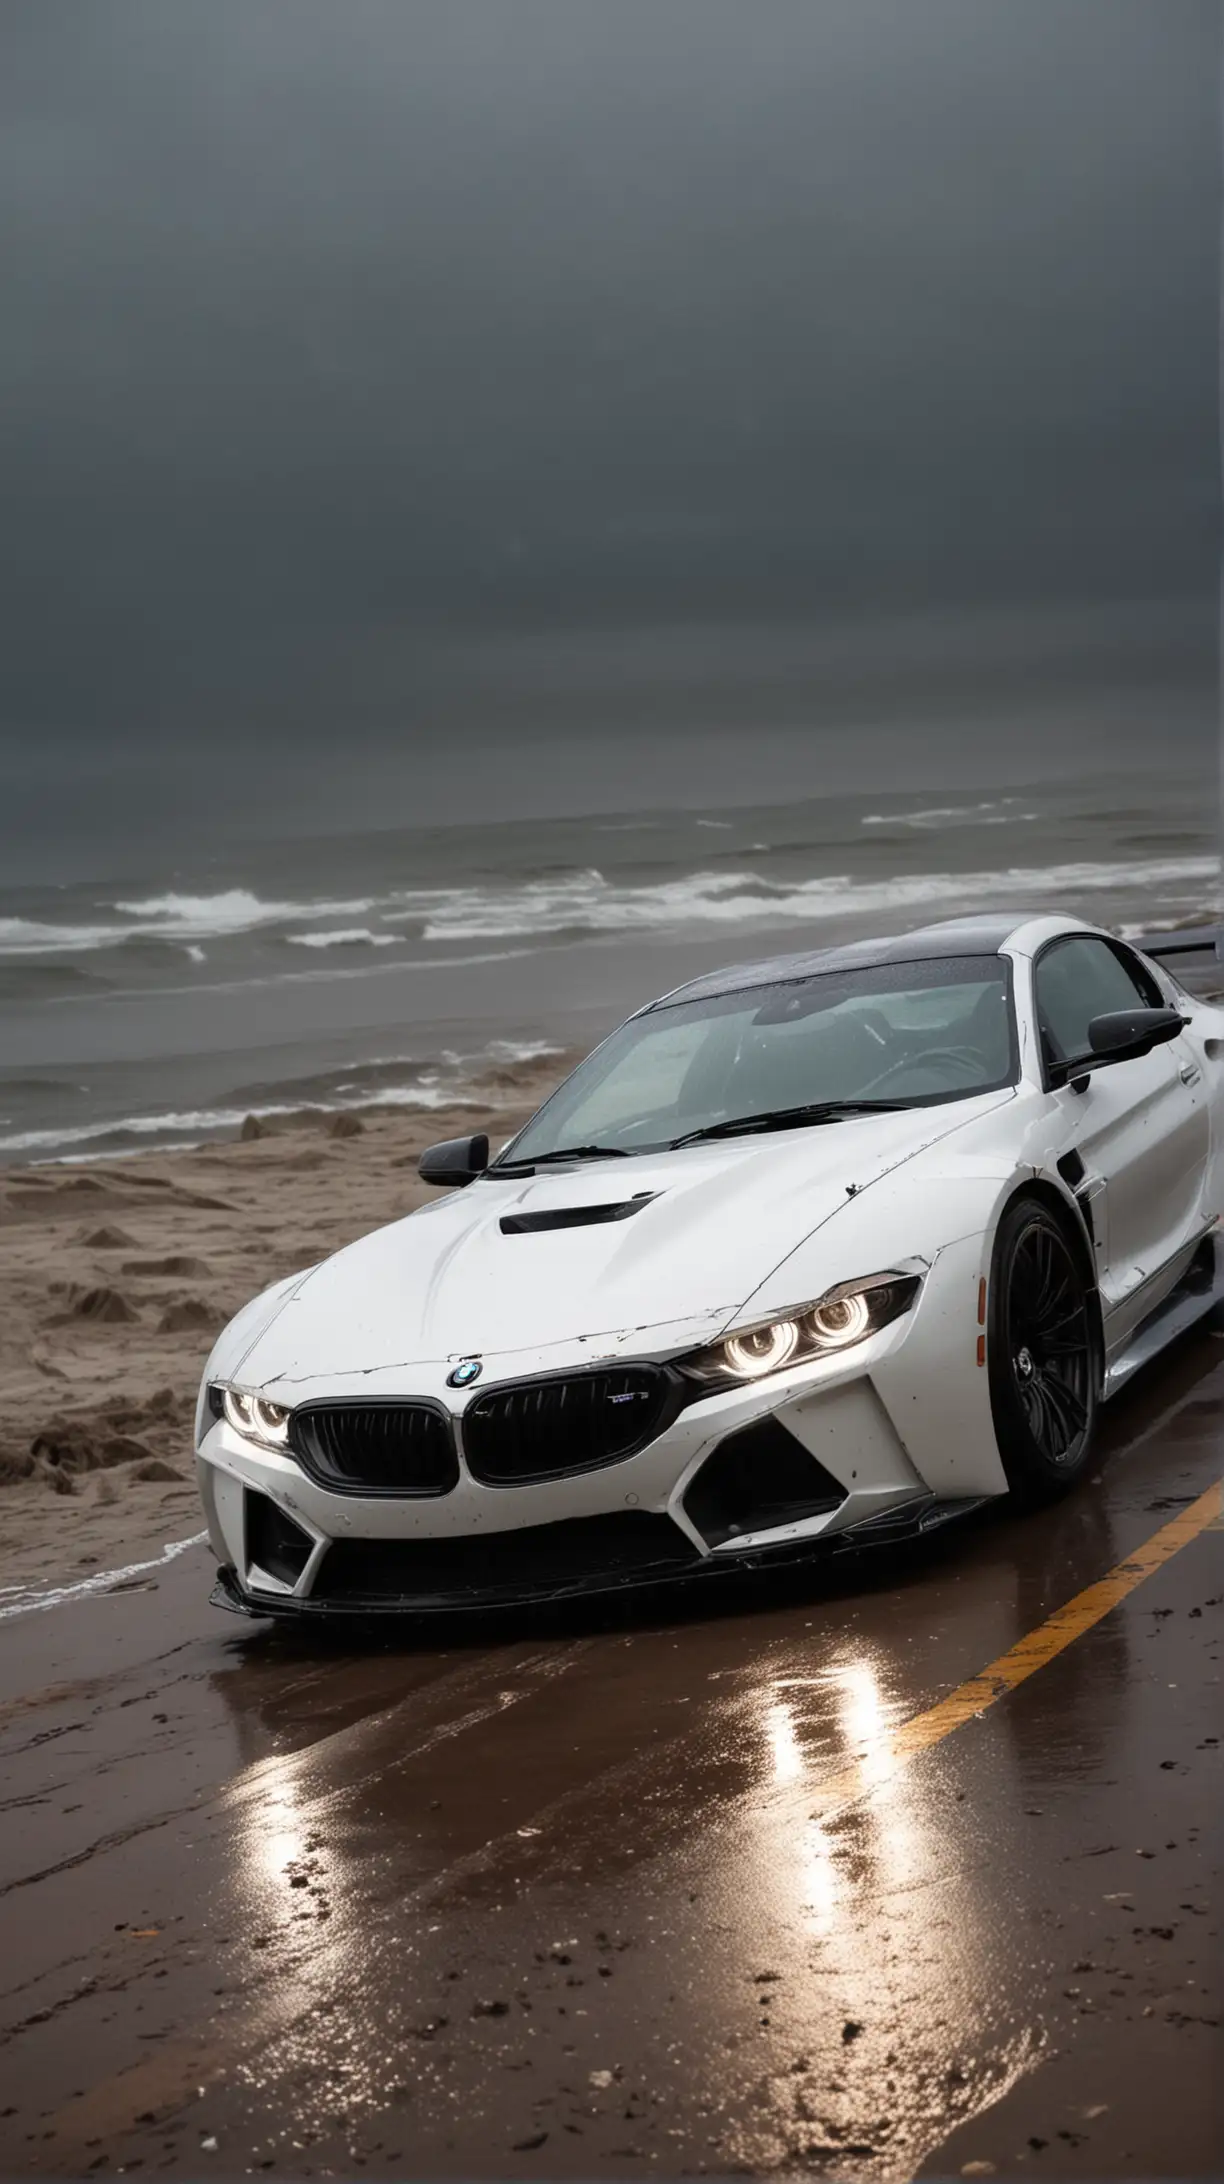 BMW super sports car with white headlights on against the backdrop of Hurricane Sandy